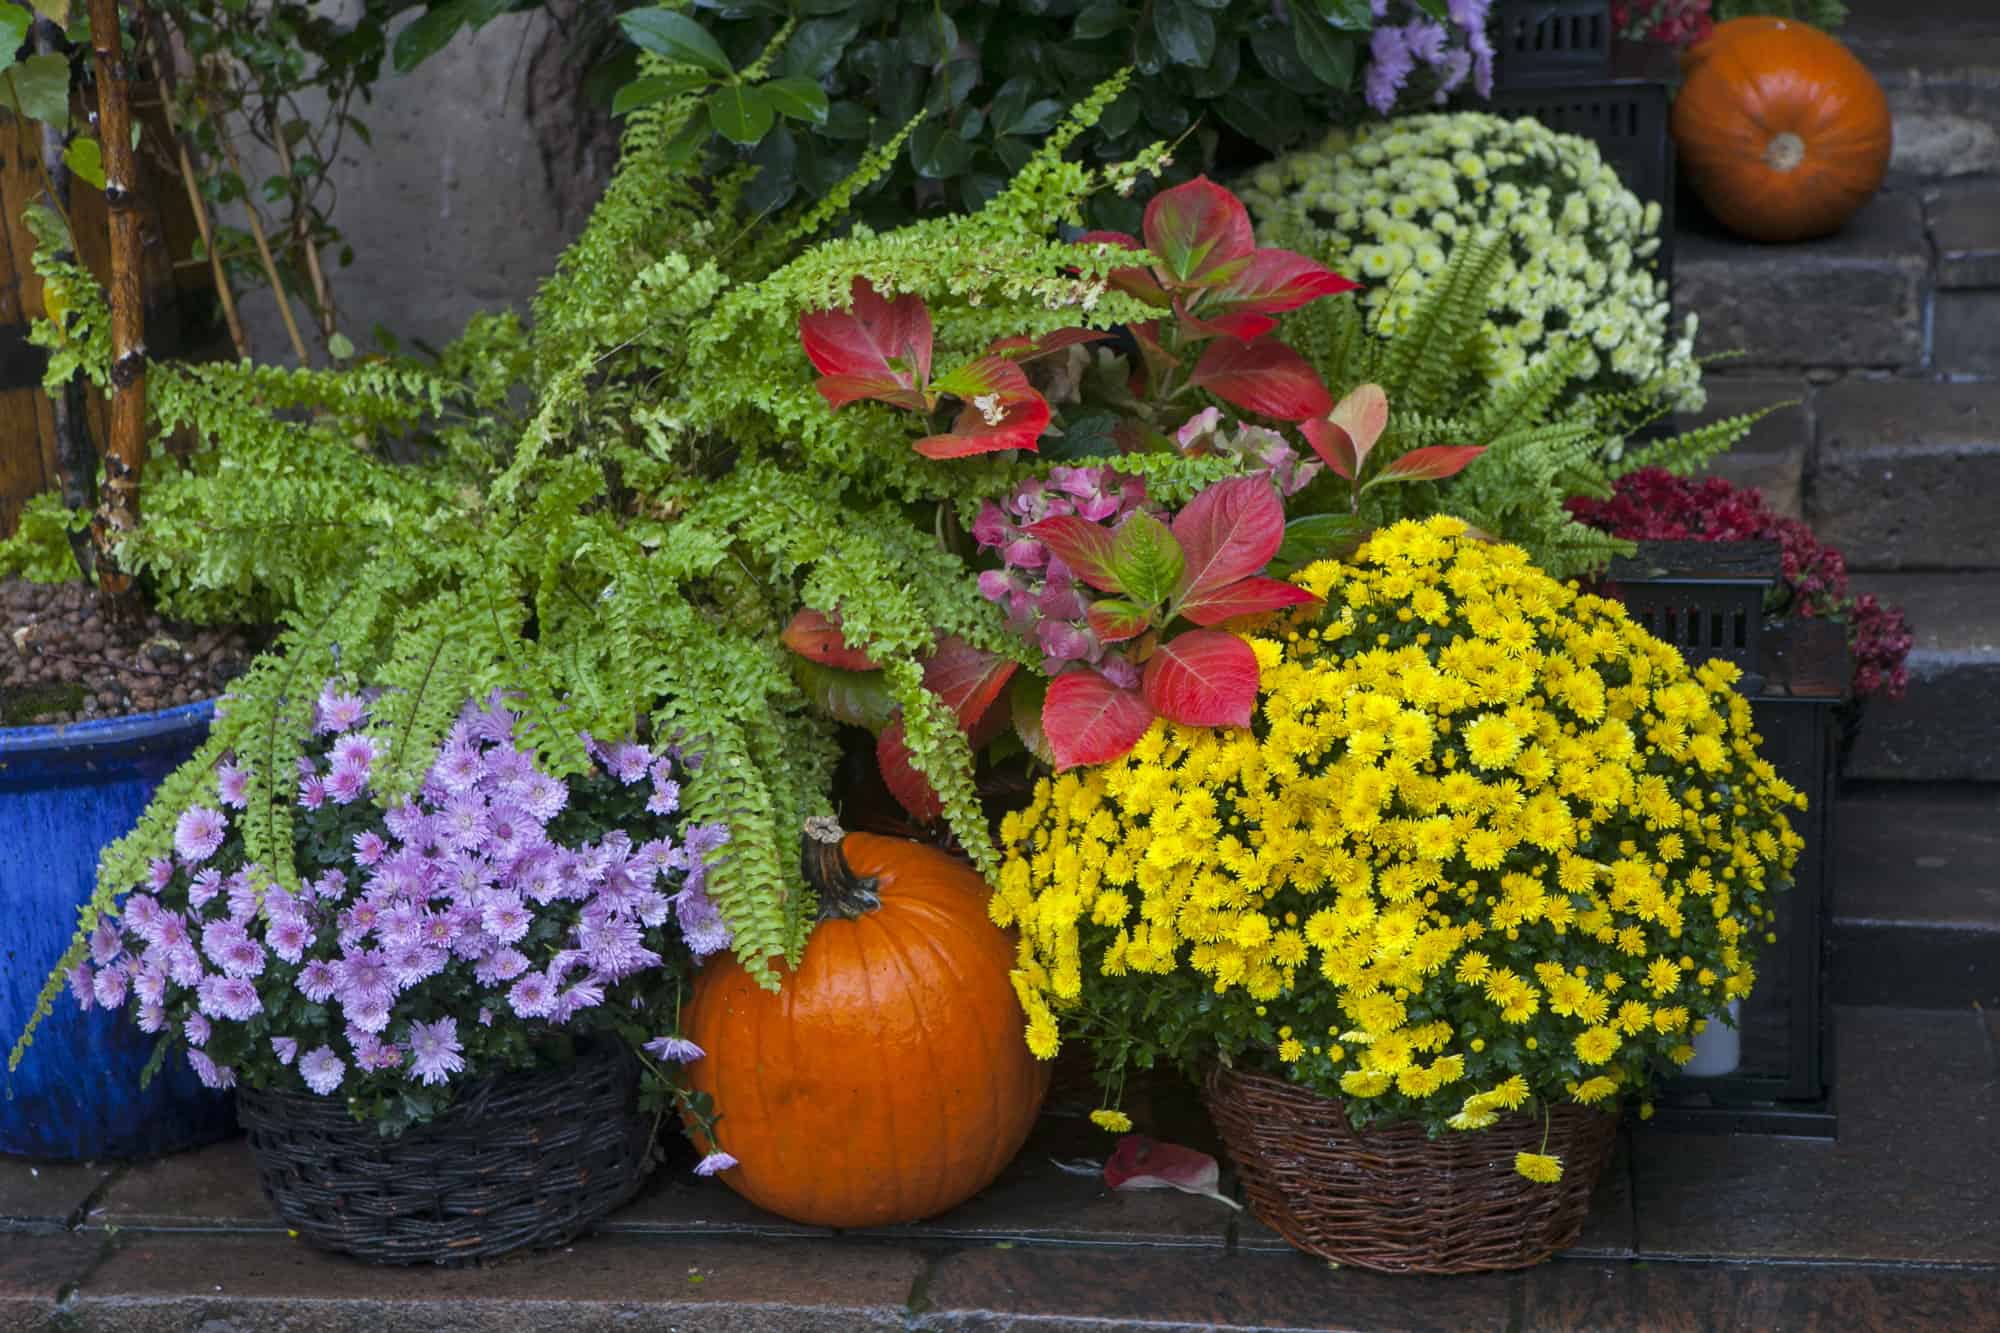 Shop for your Fall home decorations at Bussey’s Florist where you will find lovely Halloween Flowers and other Fall décor